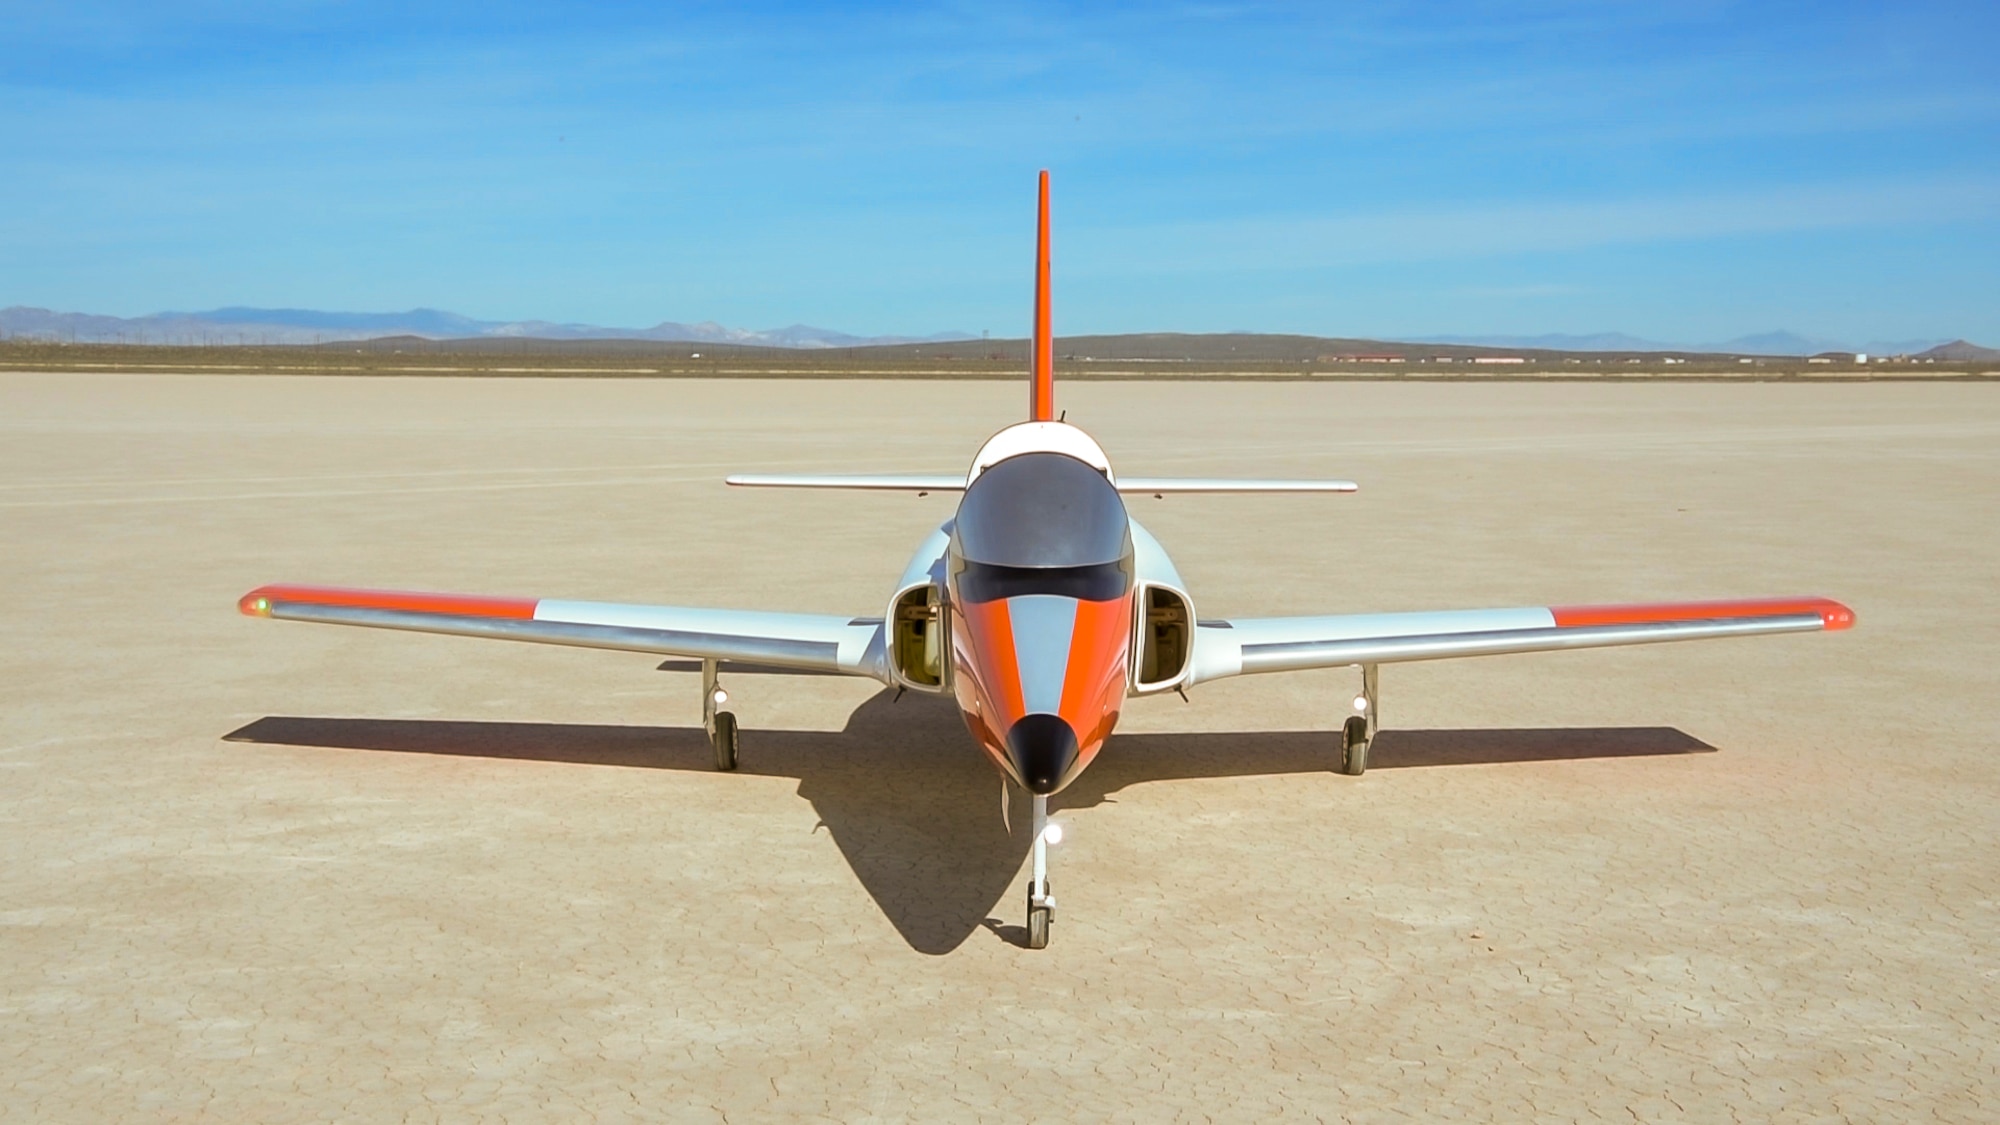 A Bob Violett Models ‘Renegade’ commercial, off-the-shelf, turbine-powered jet aircraft, is parked at a dry lake bed prior to a test flight at Edwards Air Force Base, March 4. The aircraft will be used as an autonomous software test bed by the 412th Test Wing's Emerging Technology Combined Test Force. (Air Force photo by Chris Dyer)